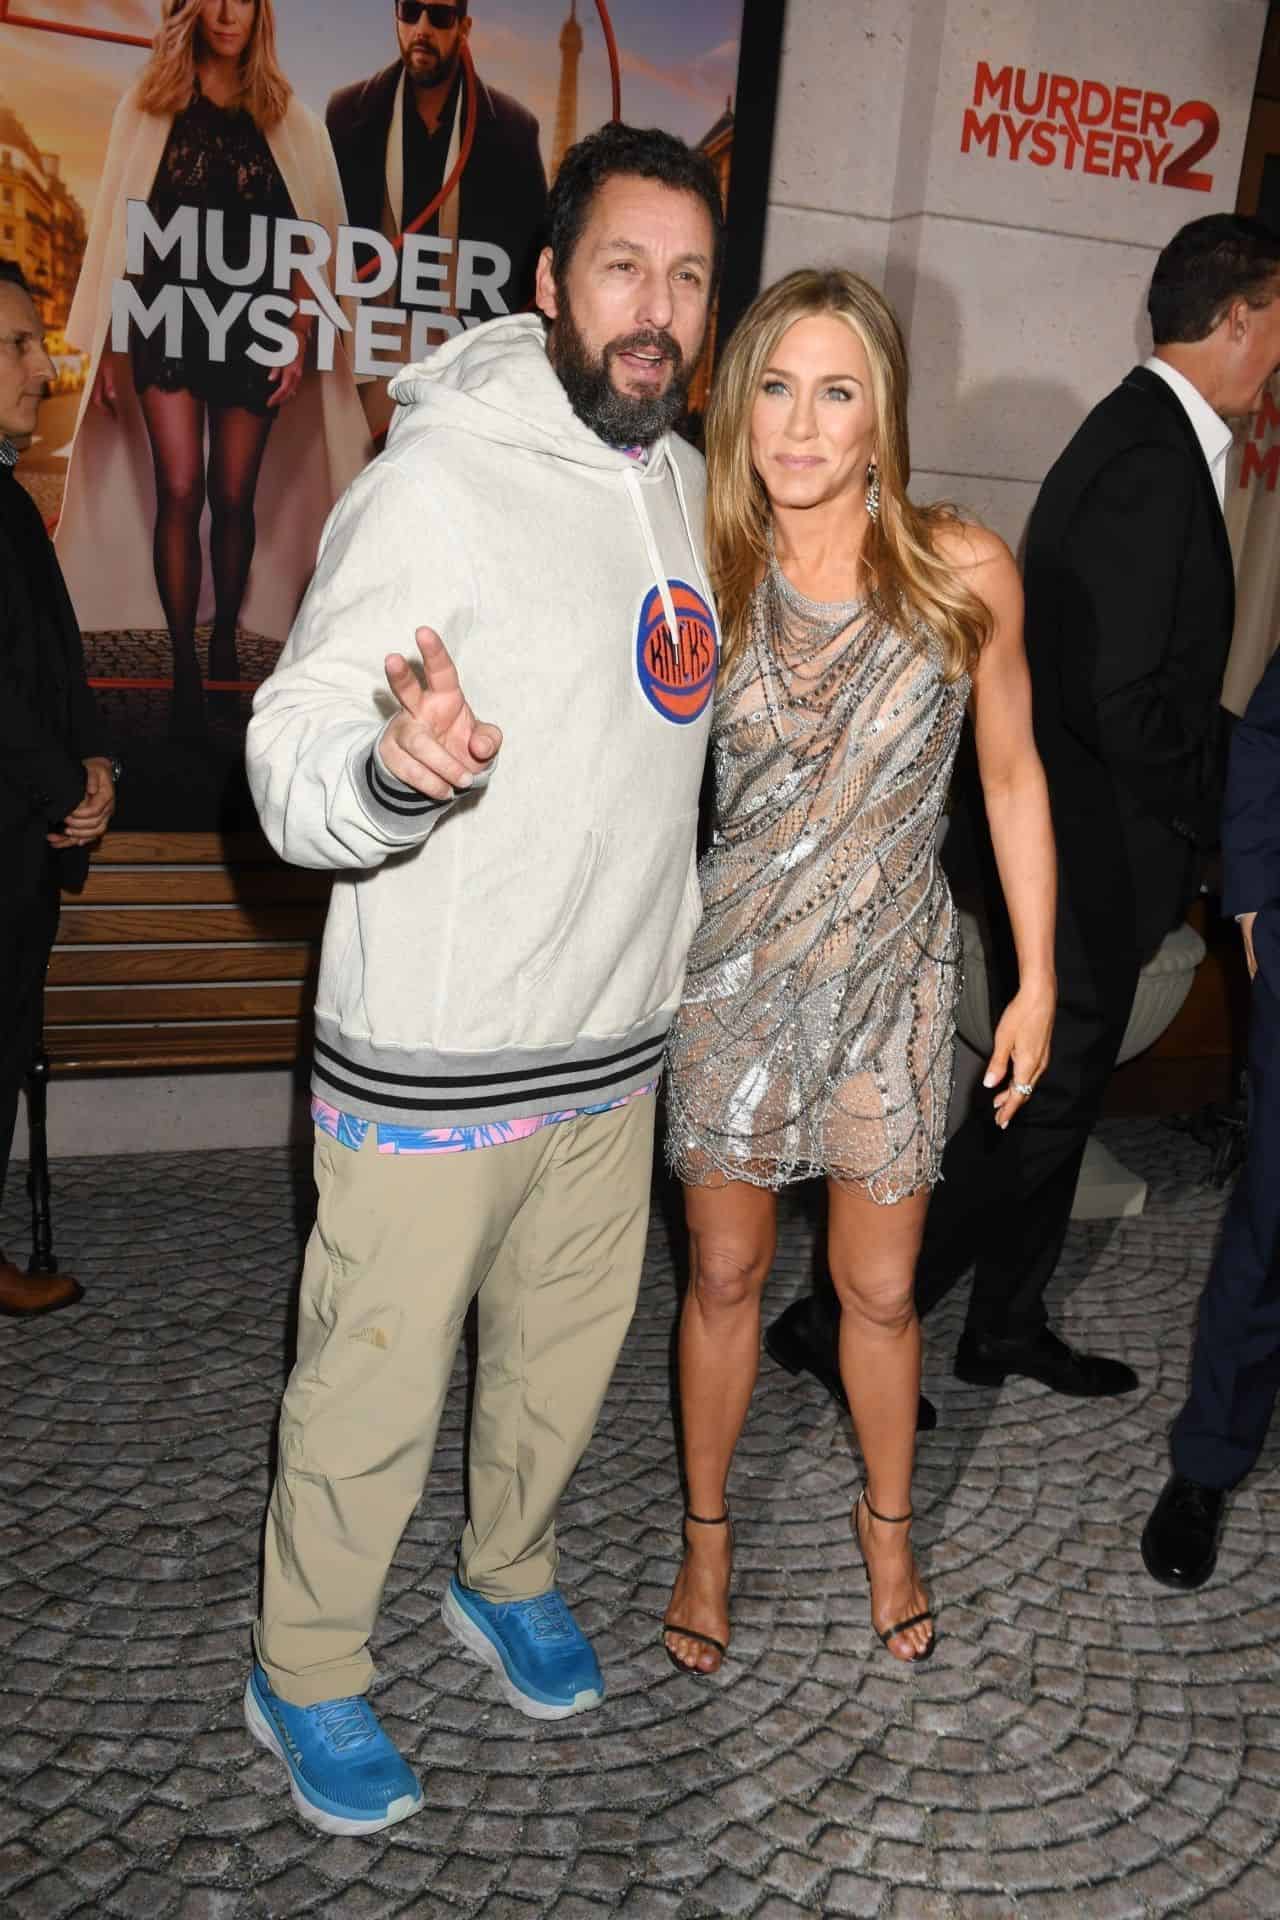 Jennifer Aniston Shines in a Chainmail Dress at "Murder Mystery 2" Premiere